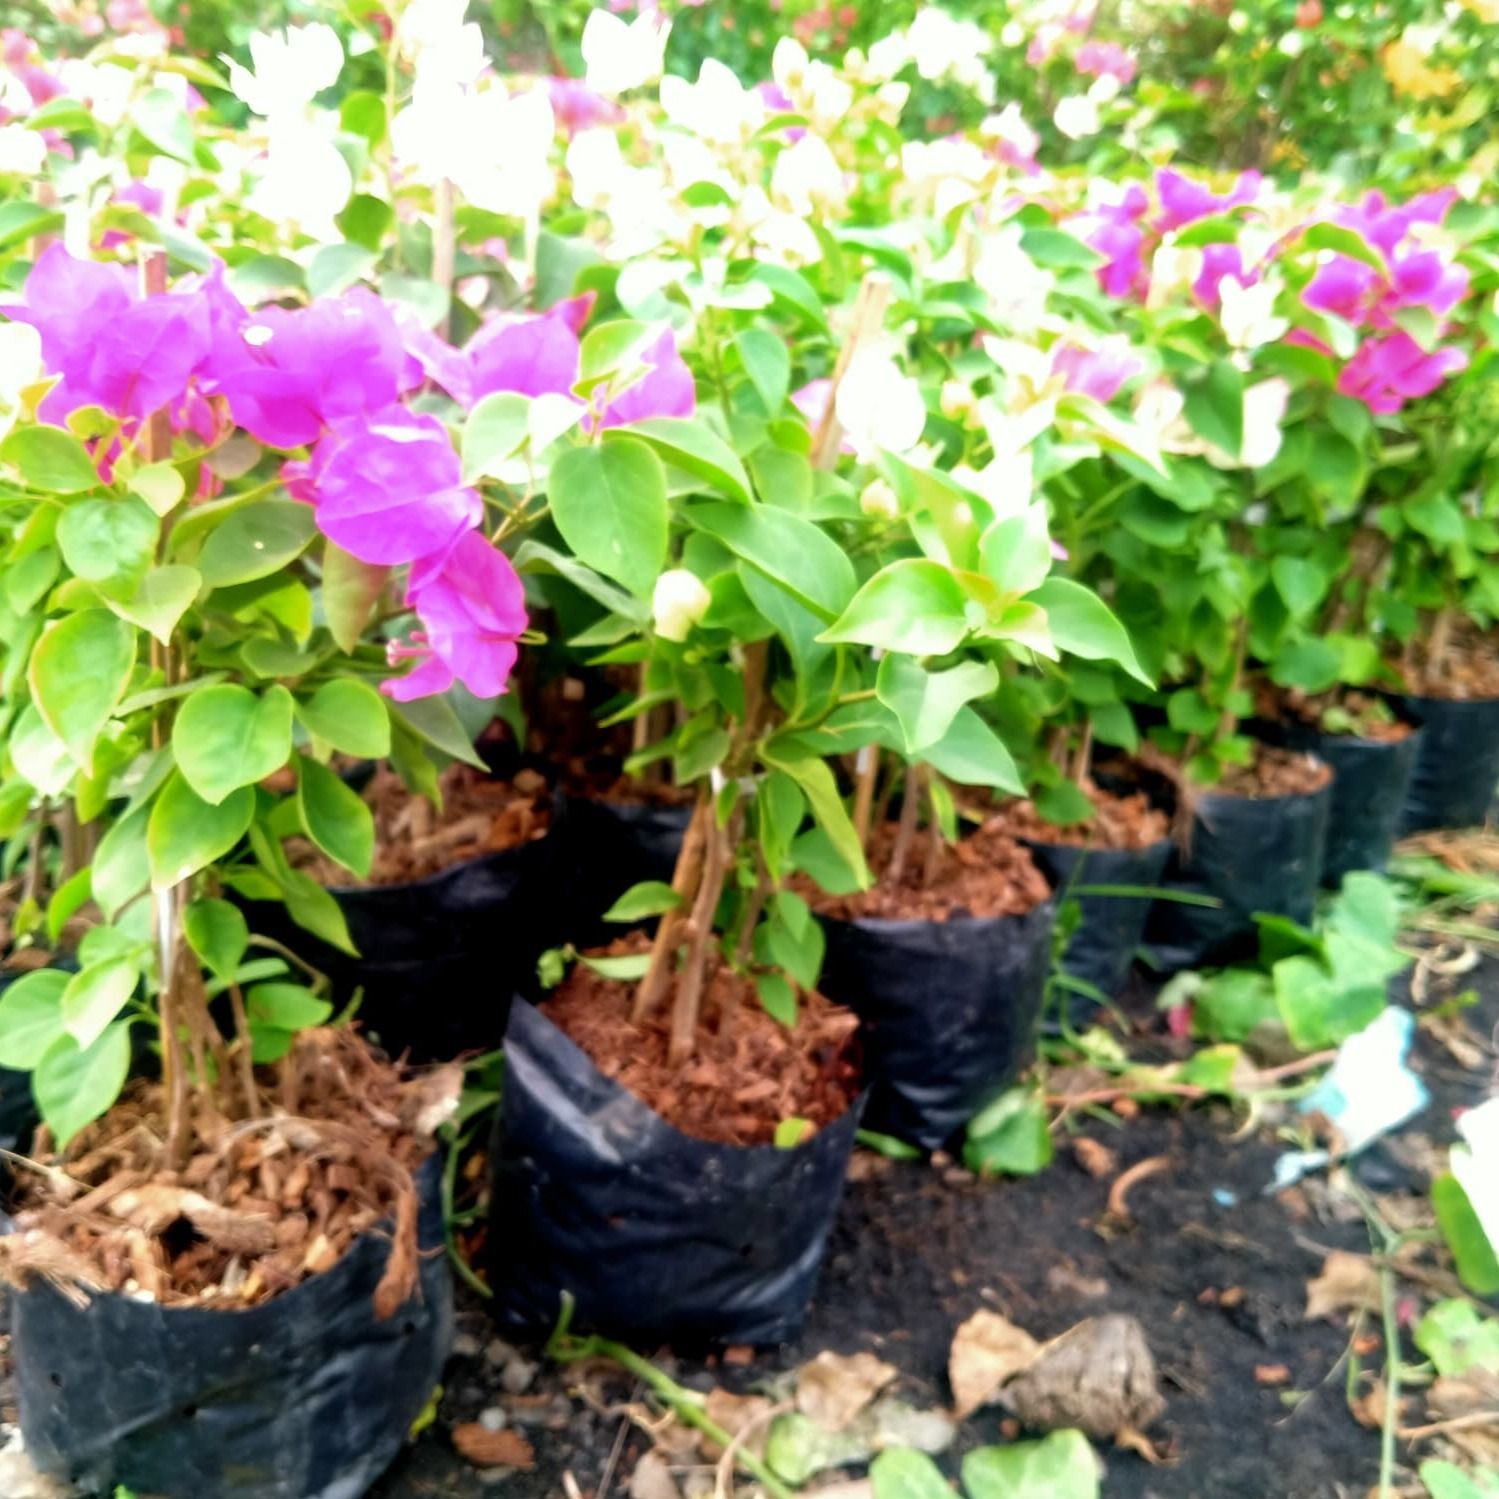 bougainvilleas small size in black bag multi color pink red green leaves